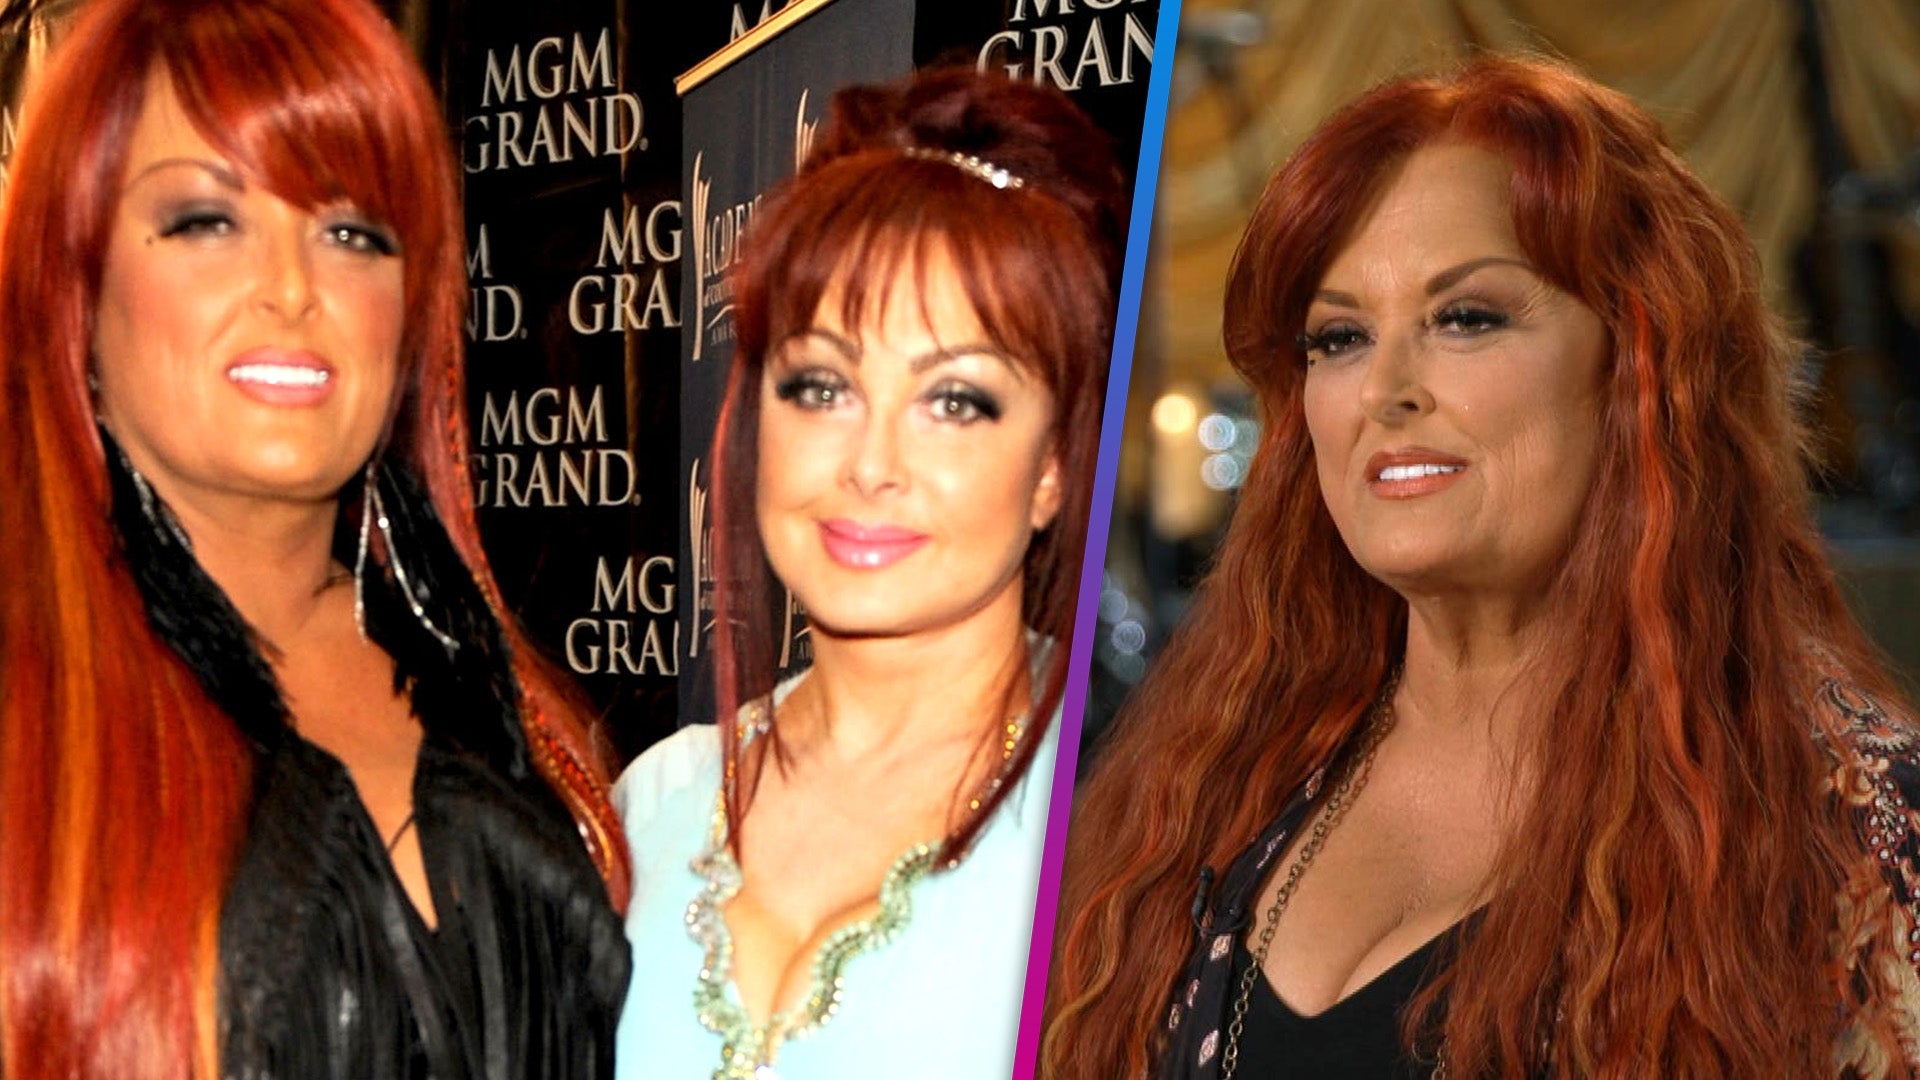 Wynonna Judd Spills on Celebrating Her Late Mom Naomi With ‘The Judds: The Final Tour’ (Exclusive)